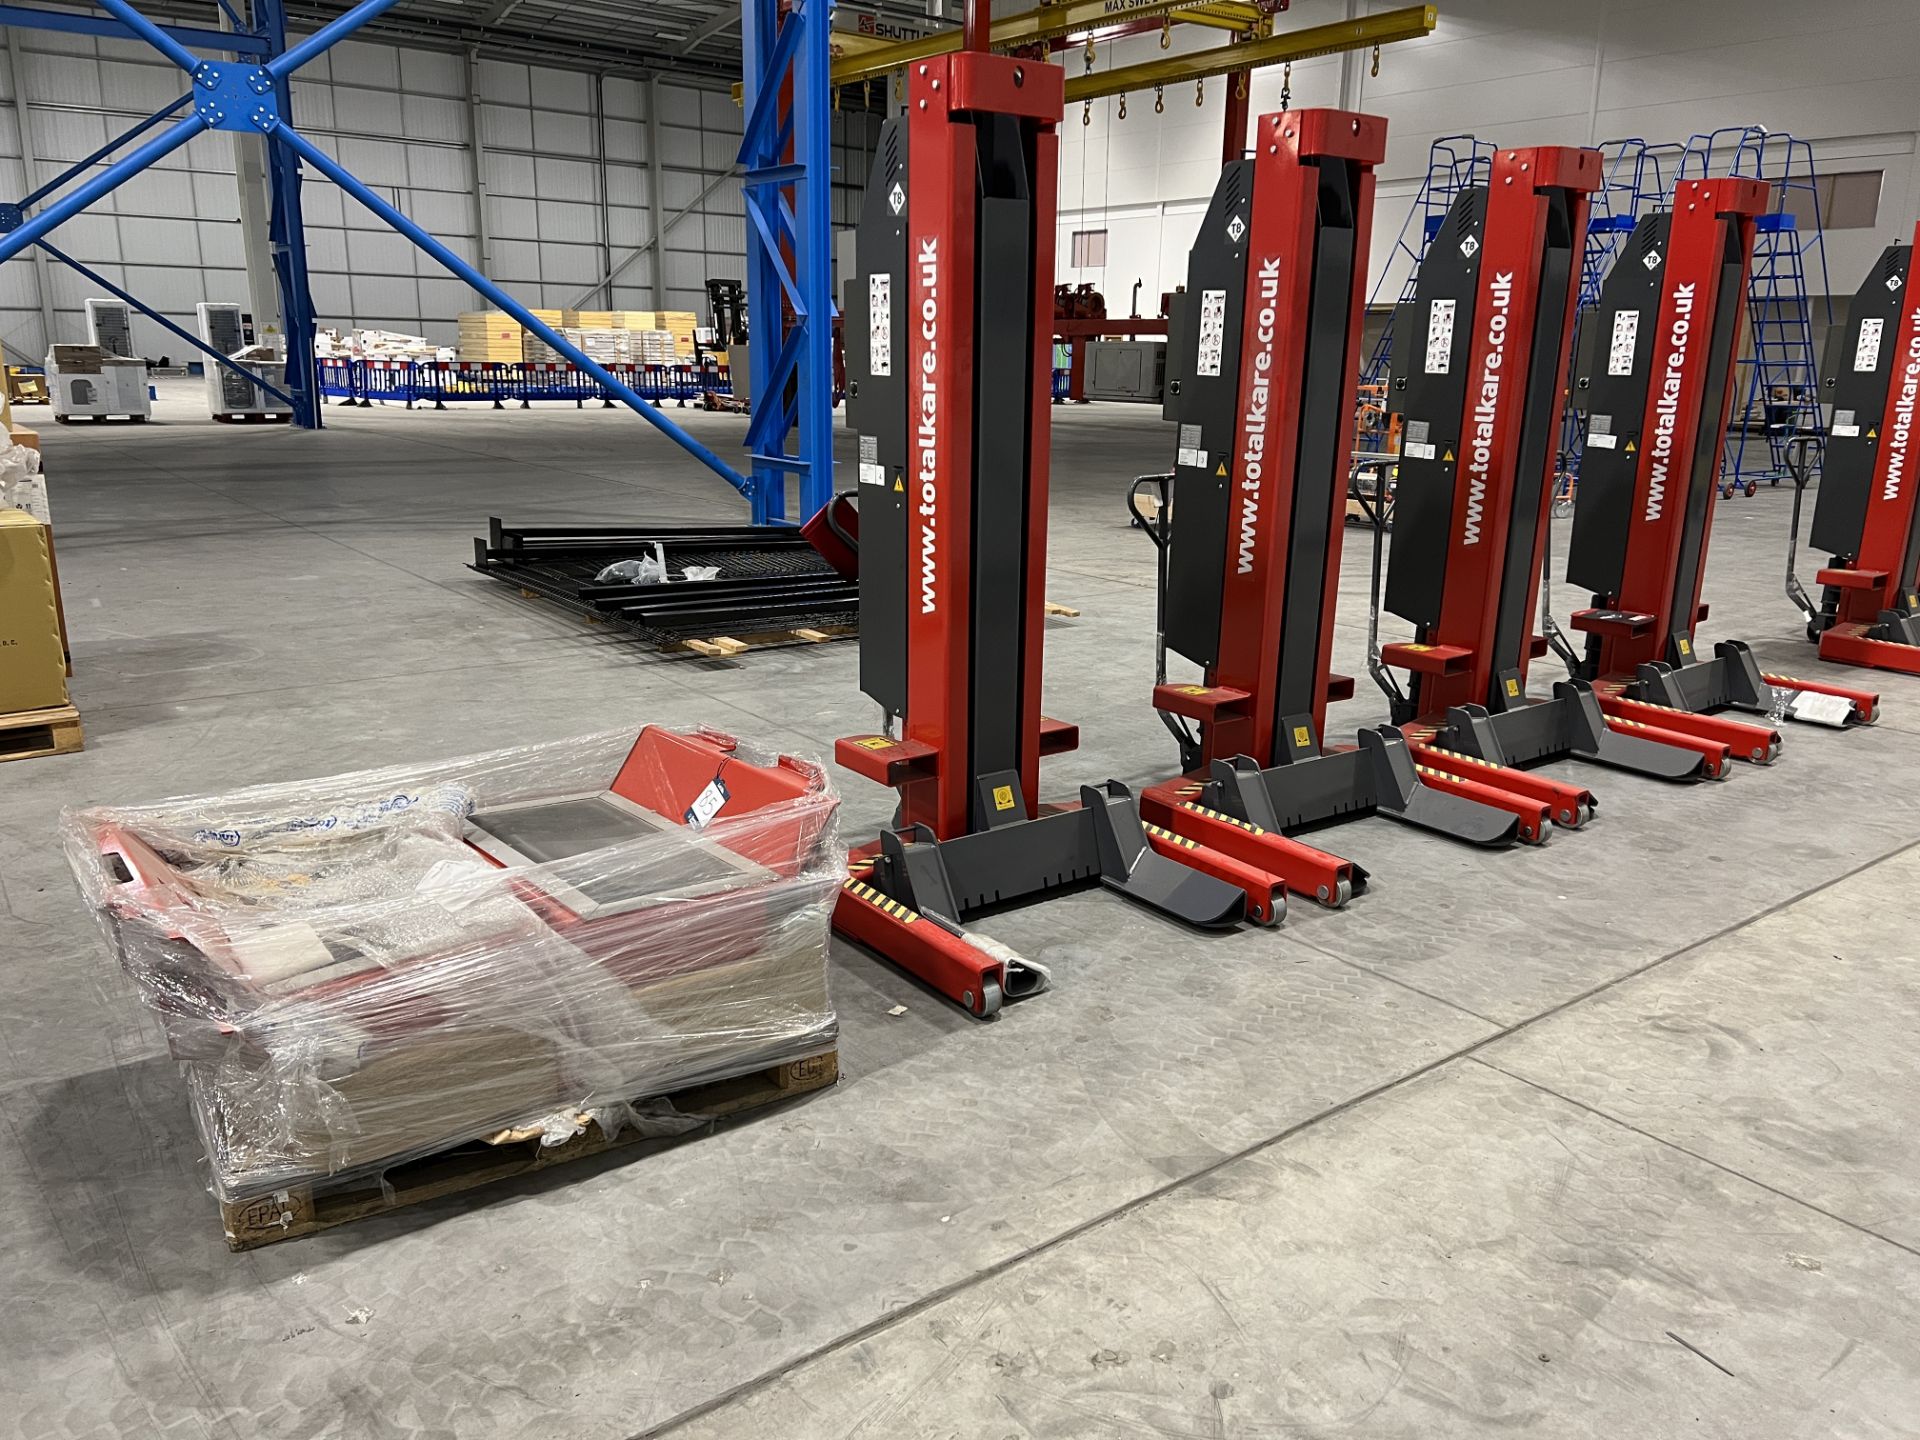 Qty 4, Totalkare T8DC cable free mobile column vehicle lifts, S/No. 012239/4, 012239/3, 012239/2, - Image 2 of 18